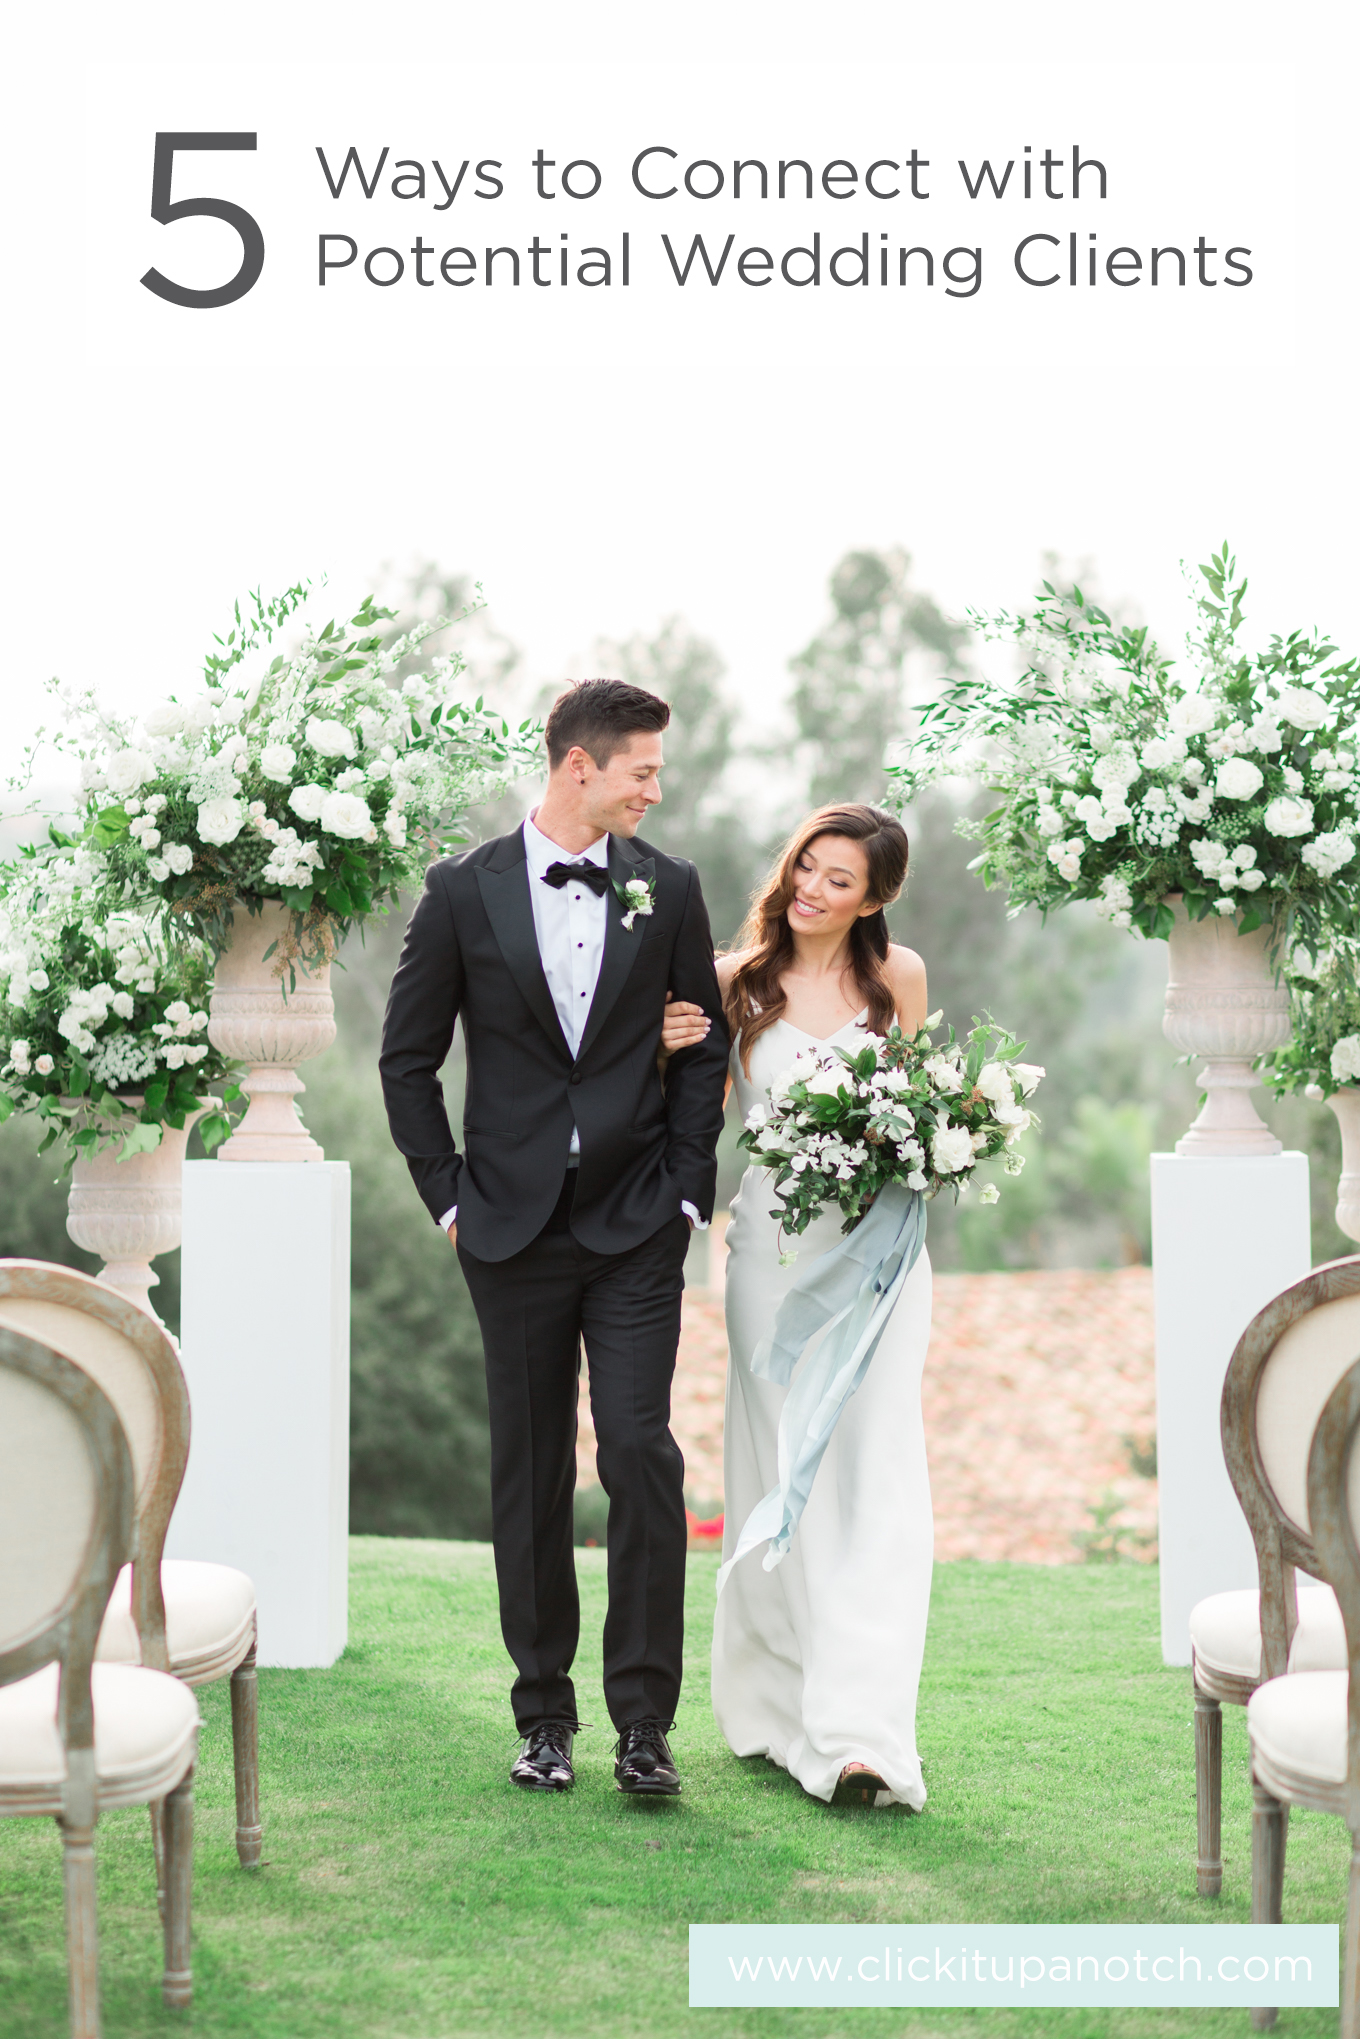 This is the most detailed article I've read on connecting with clients. Great for new wedding photographers! Read - "5 Ways to Connect with Potential Wedding Clients"